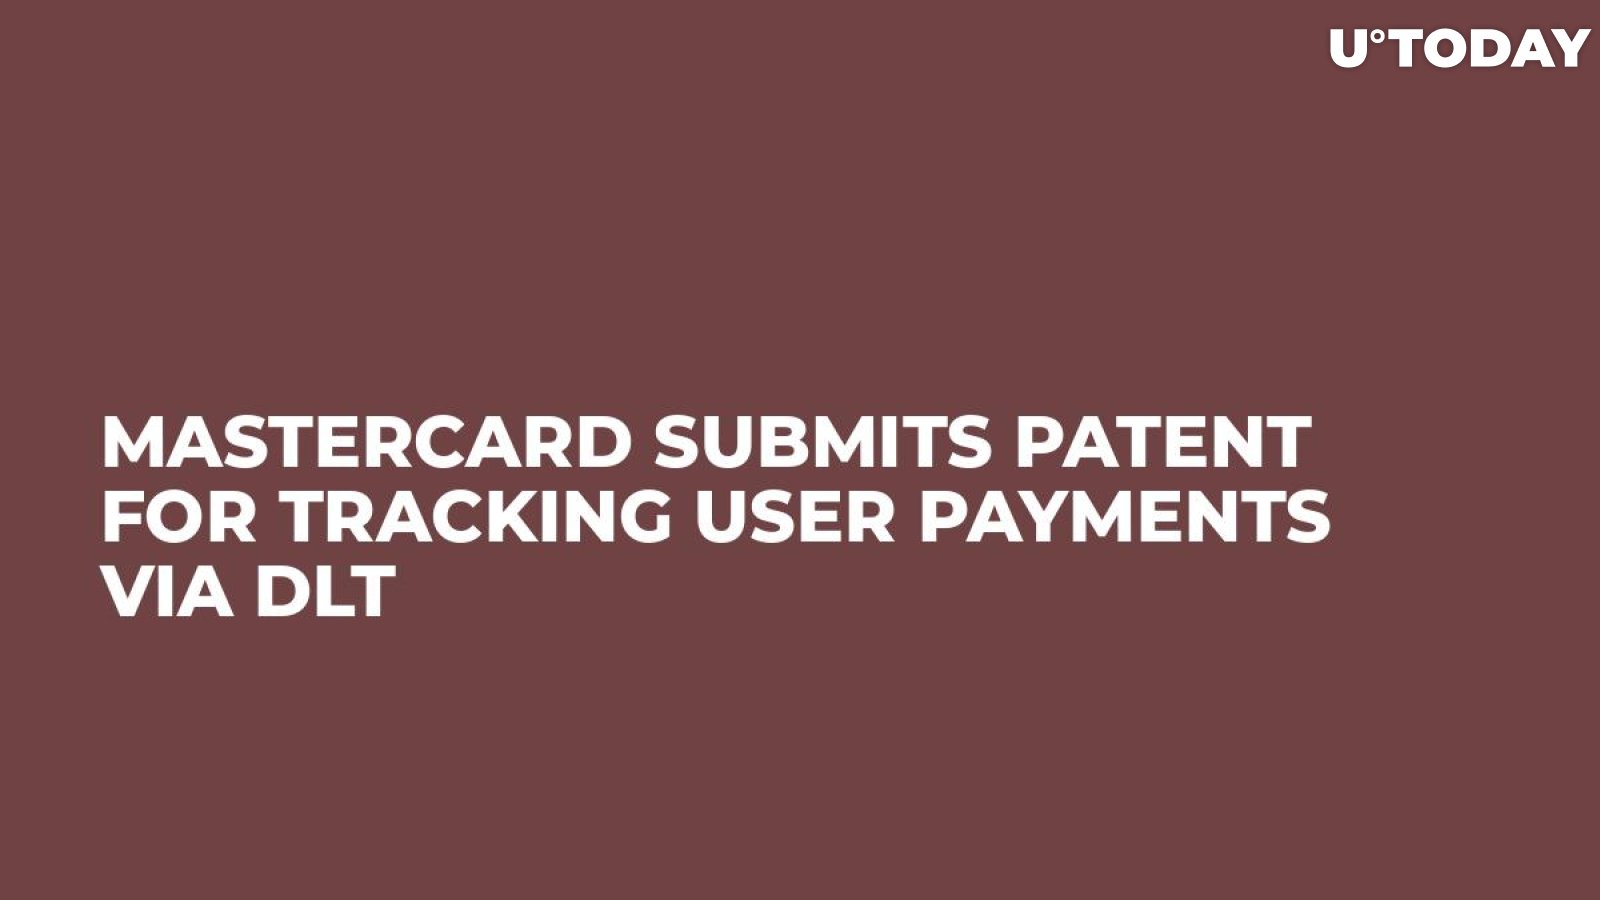 Mastercard Submits Patent for Tracking User Payments via DLT